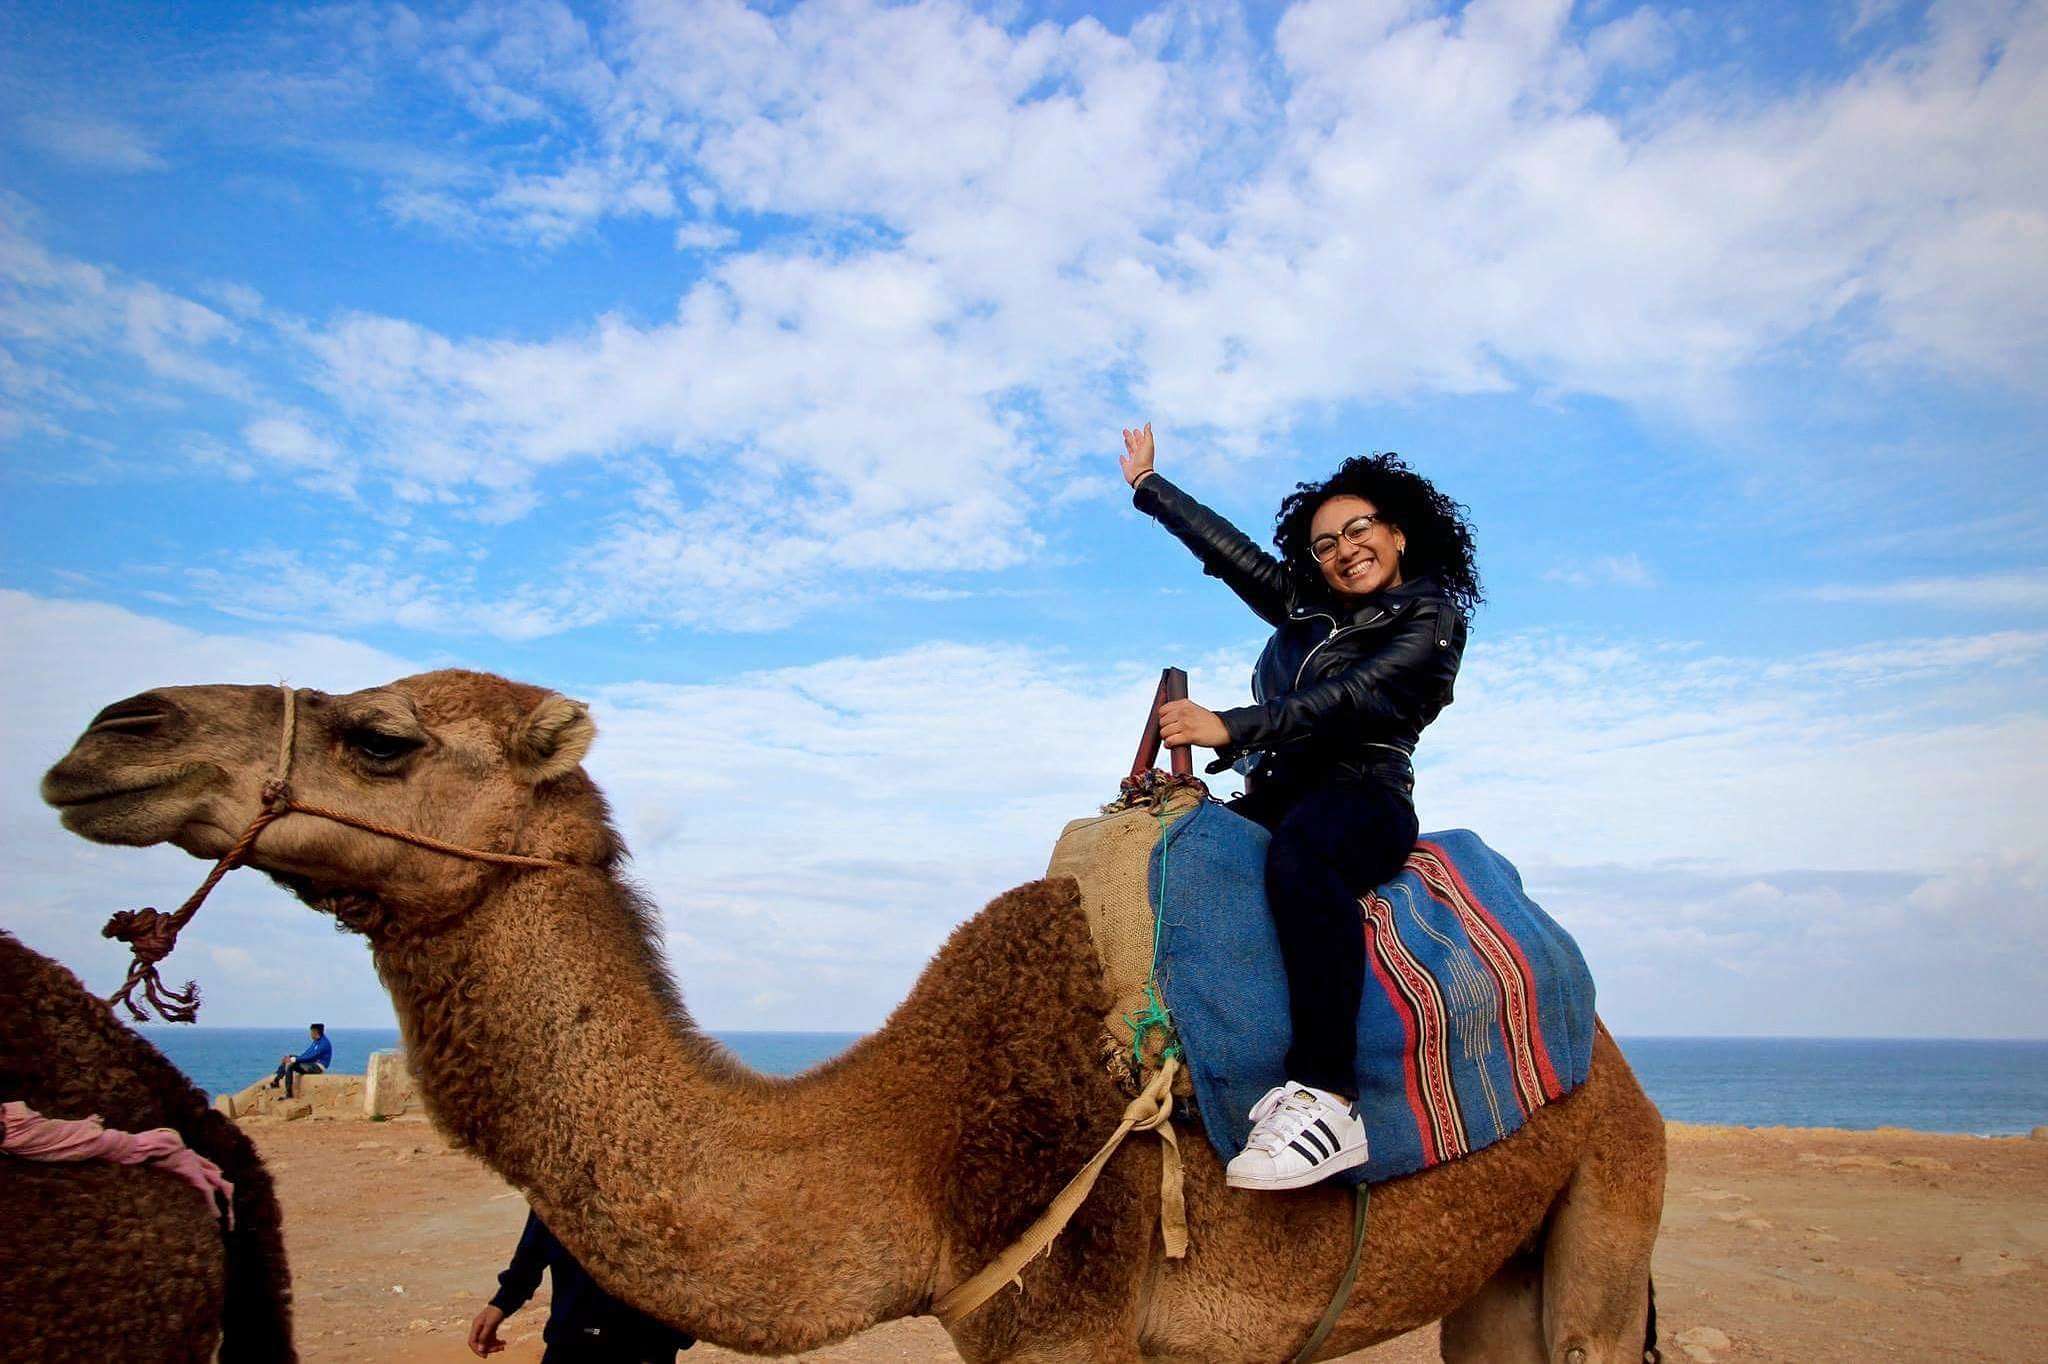 Student sitting on a camel.